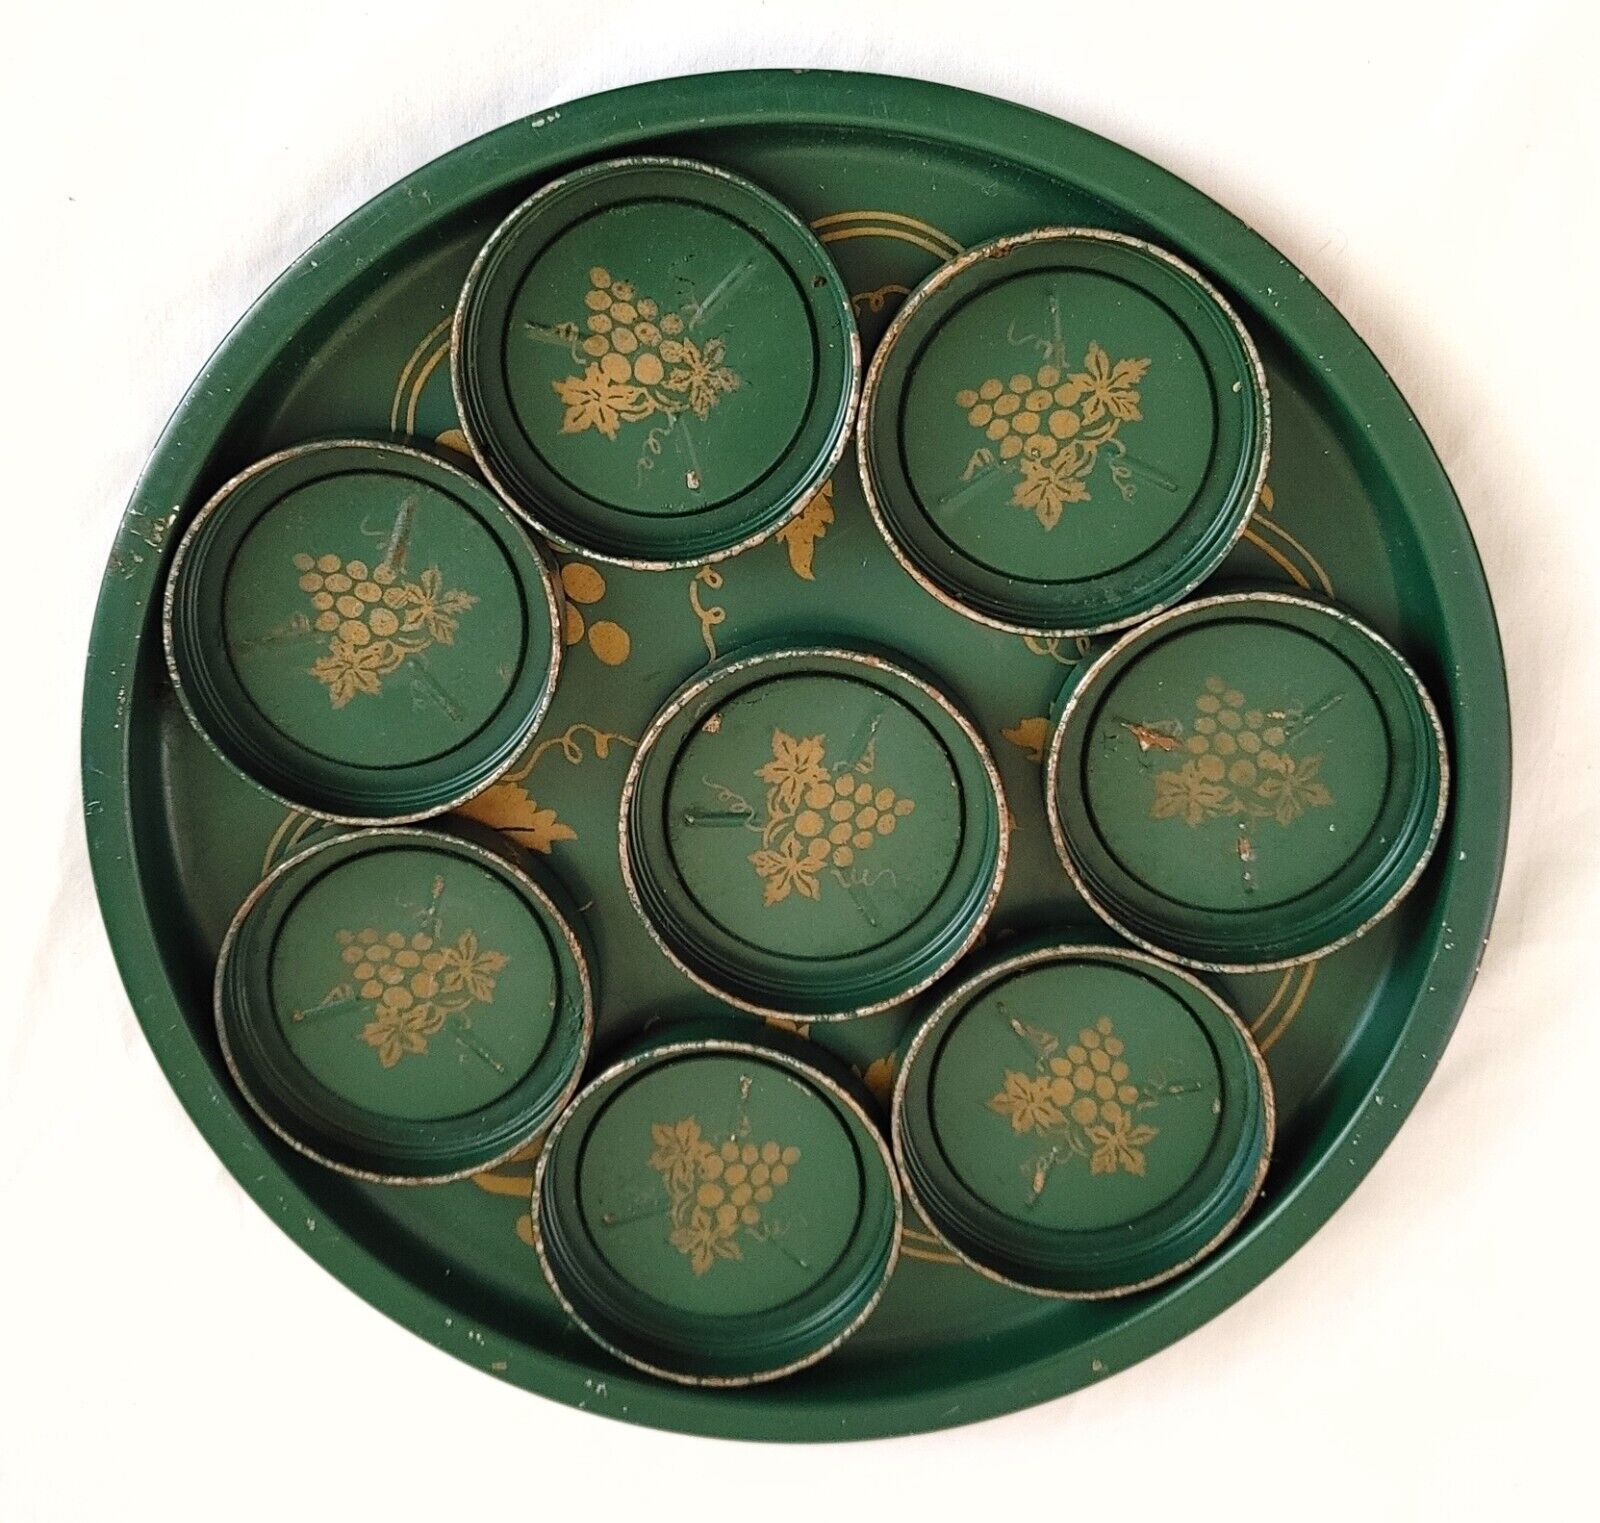 Vintage MCM Green Serving Tray with Drink Holder Coasters Metal Toleware Grapes